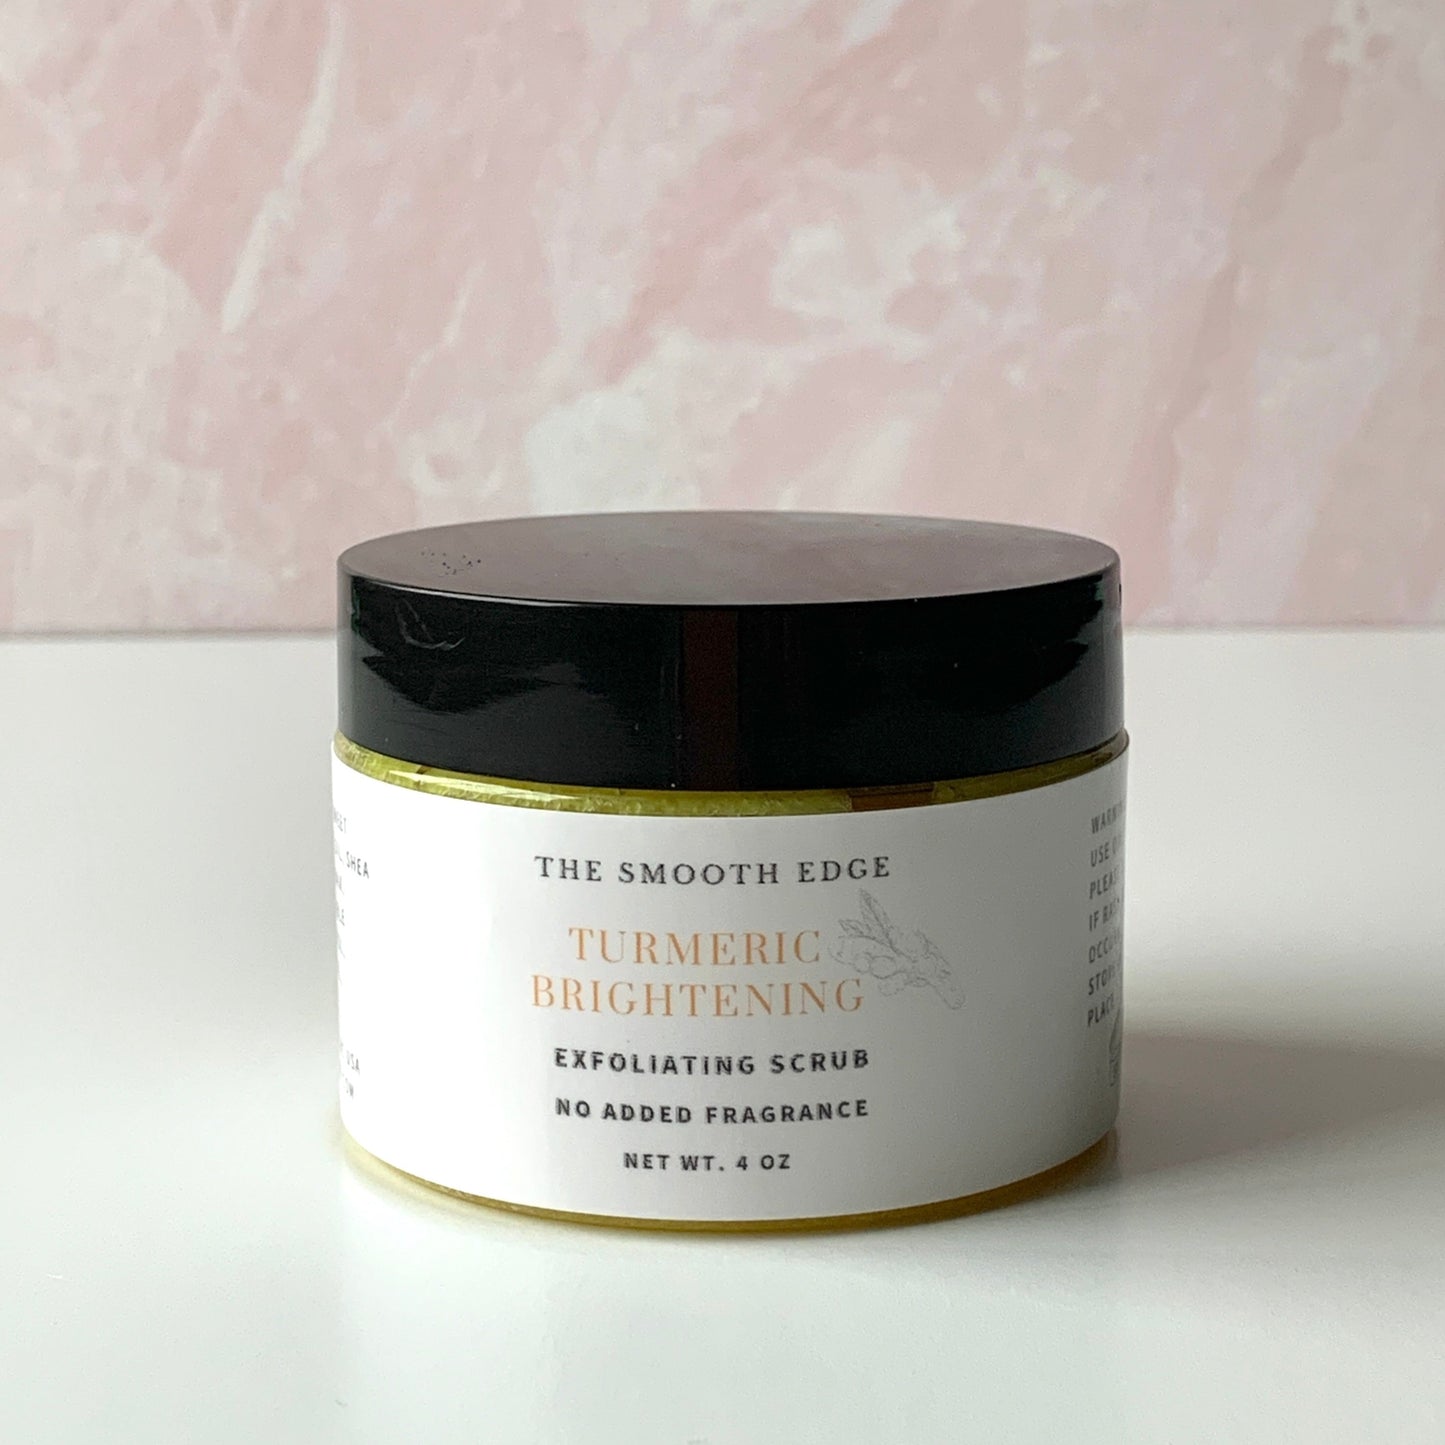 A clear jar with a black lid set on a table with yellow turmeric sugar exfoliating scrub inside.